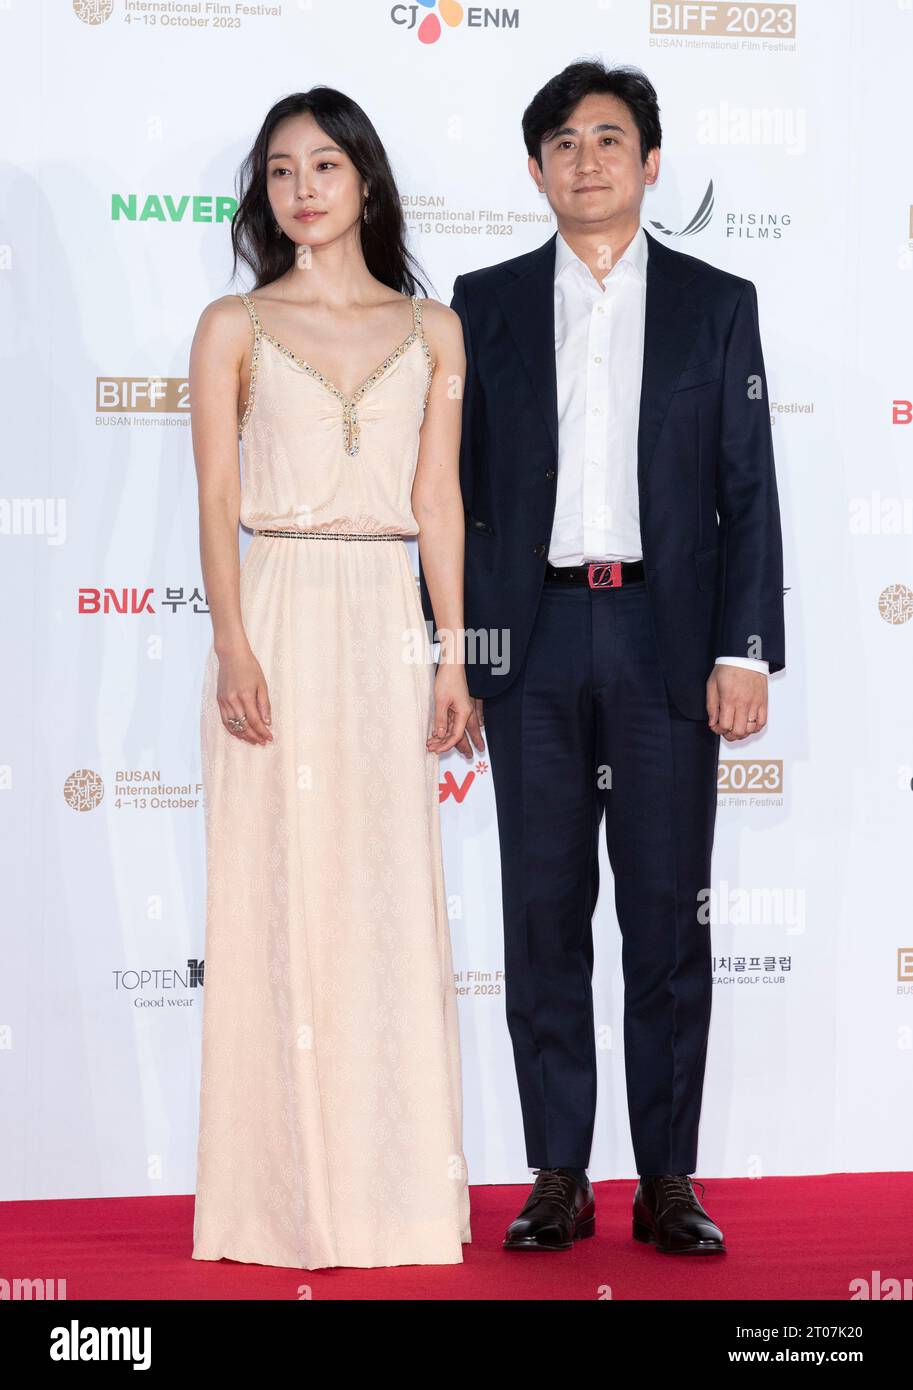 Busan, South Korea. 4th Oct, 2022. (L to R) South Korean actors Jeon So-nee and Min Young-keun, arrives red carpet opening ceremony of during the 28th Busan International Film Festival at Busan Cinema Center in Busan, South of Seoul, South Korea on October 4, 2023. (Photo by: Lee Young-ho/Sipa USA) Credit: Sipa USA/Alamy Live News Stock Photo